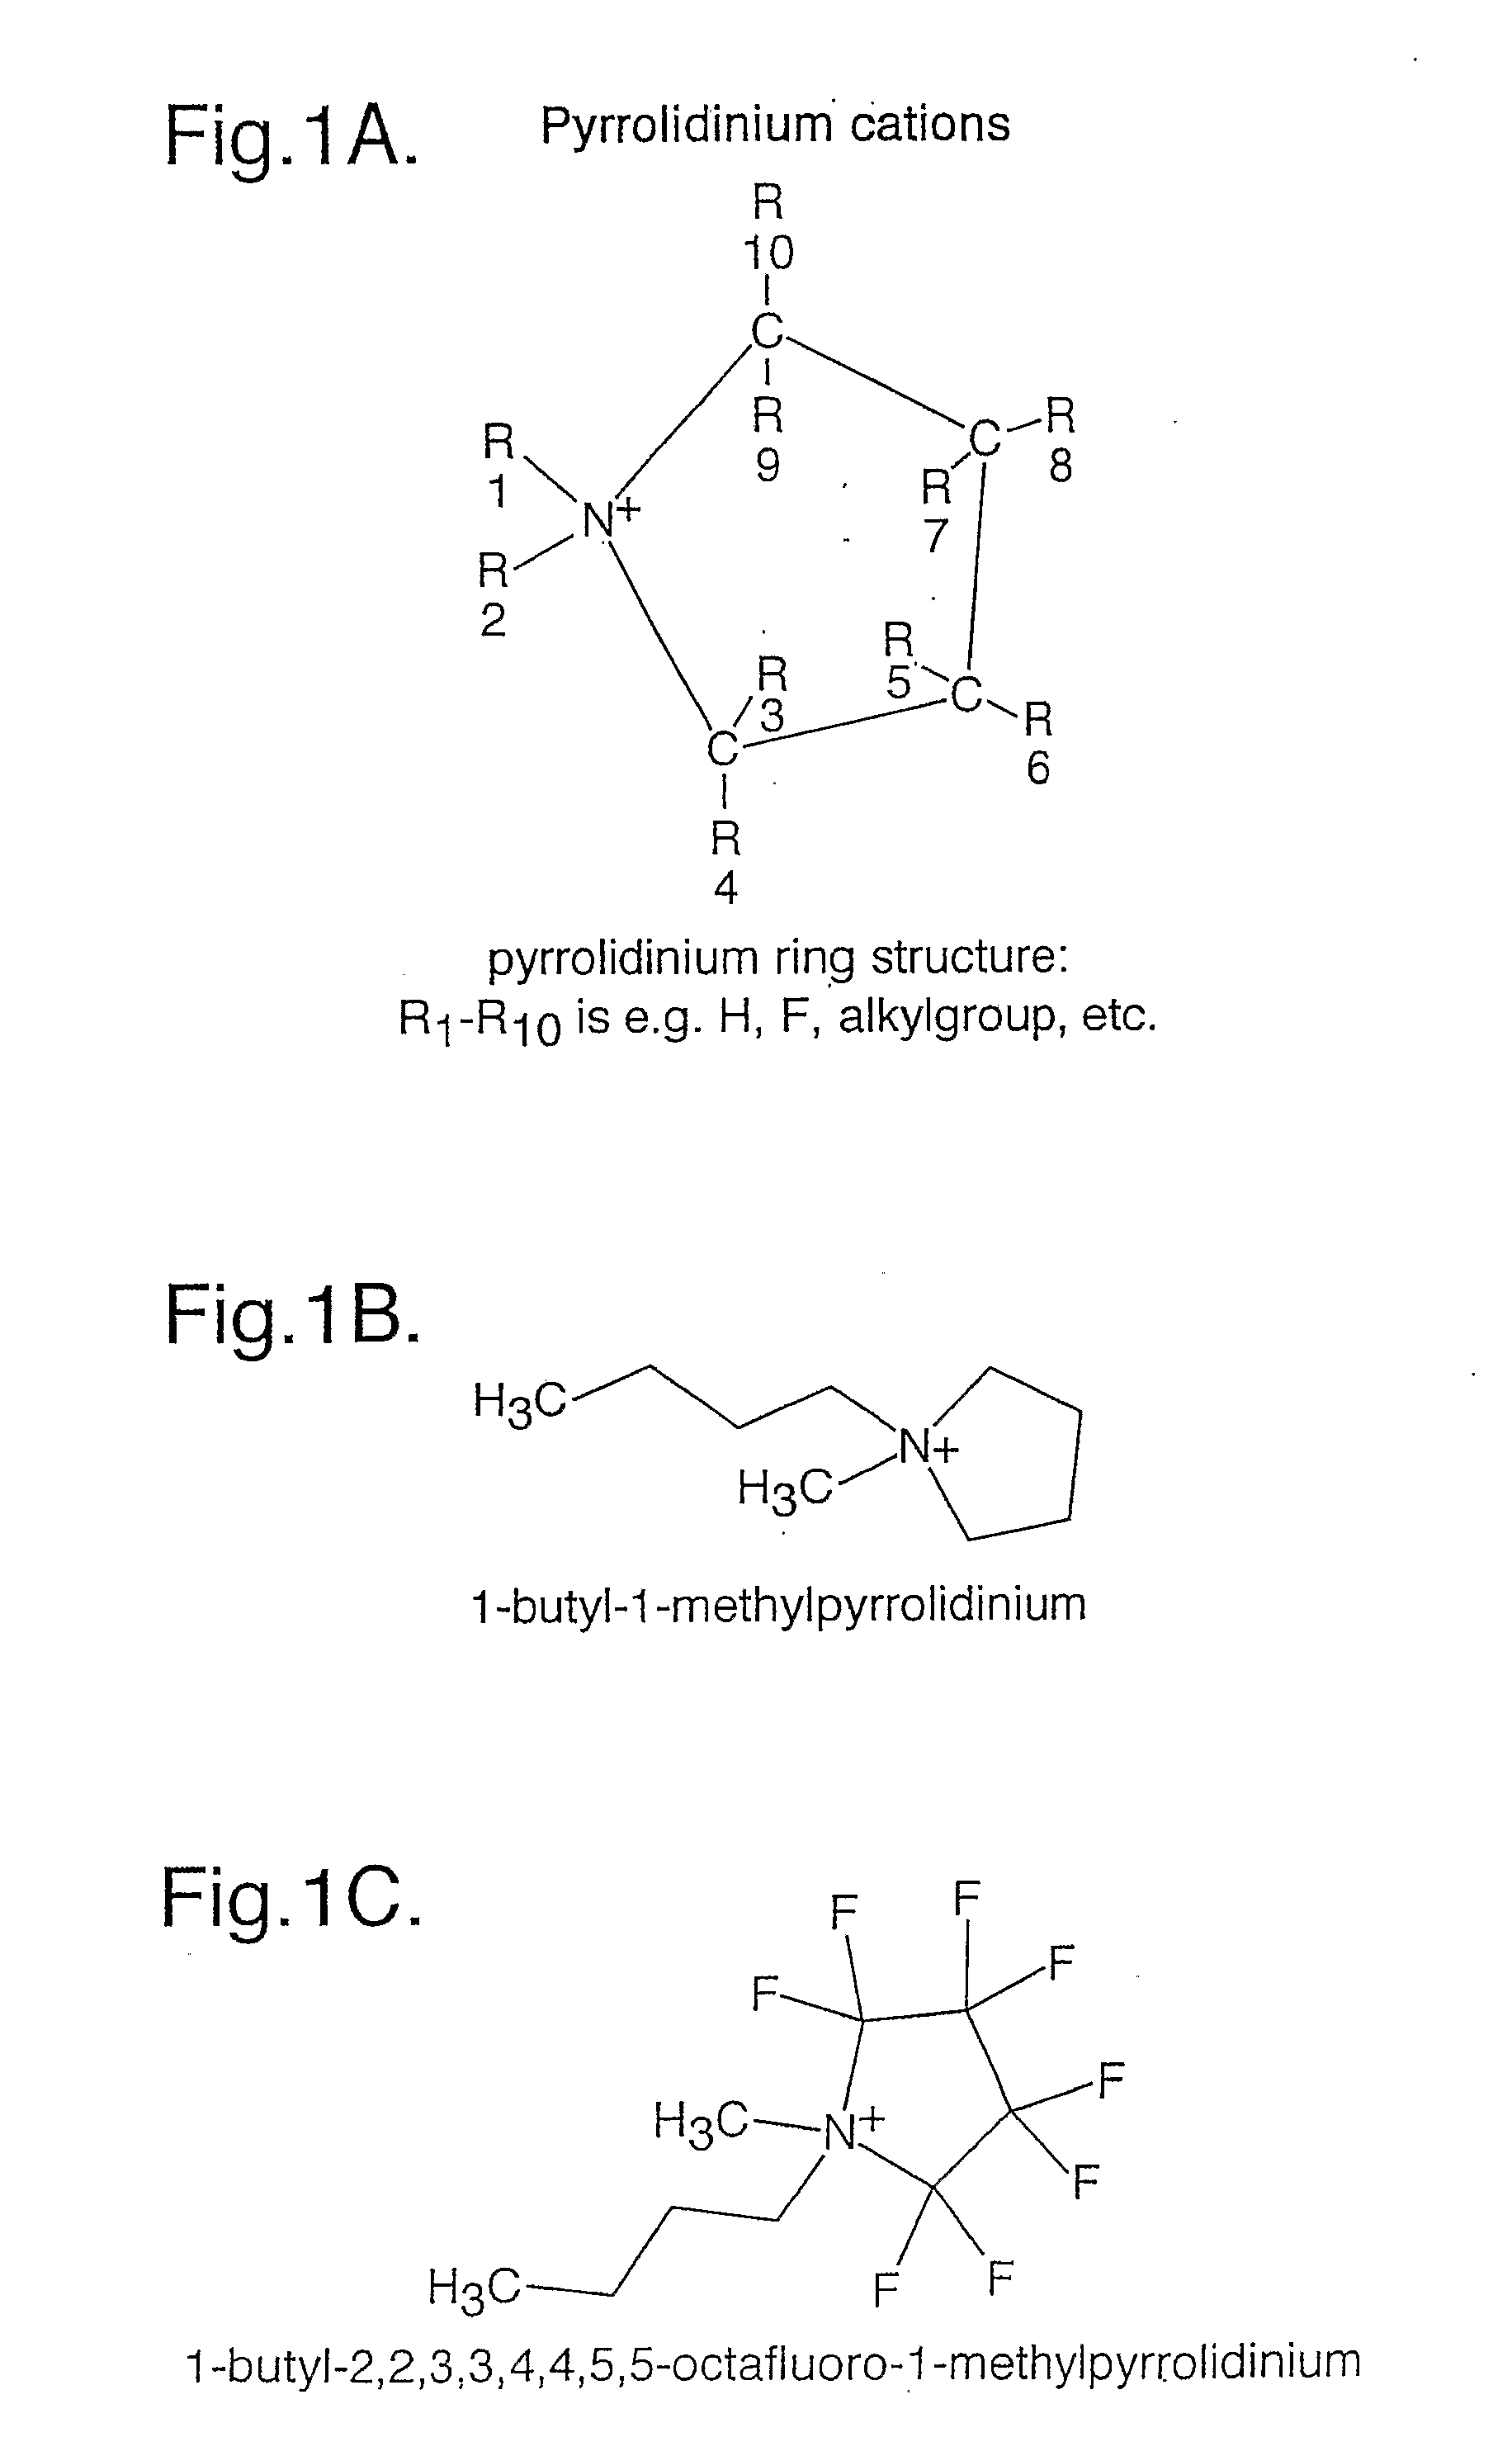 Electrochemical Element for Use at High Temperatures